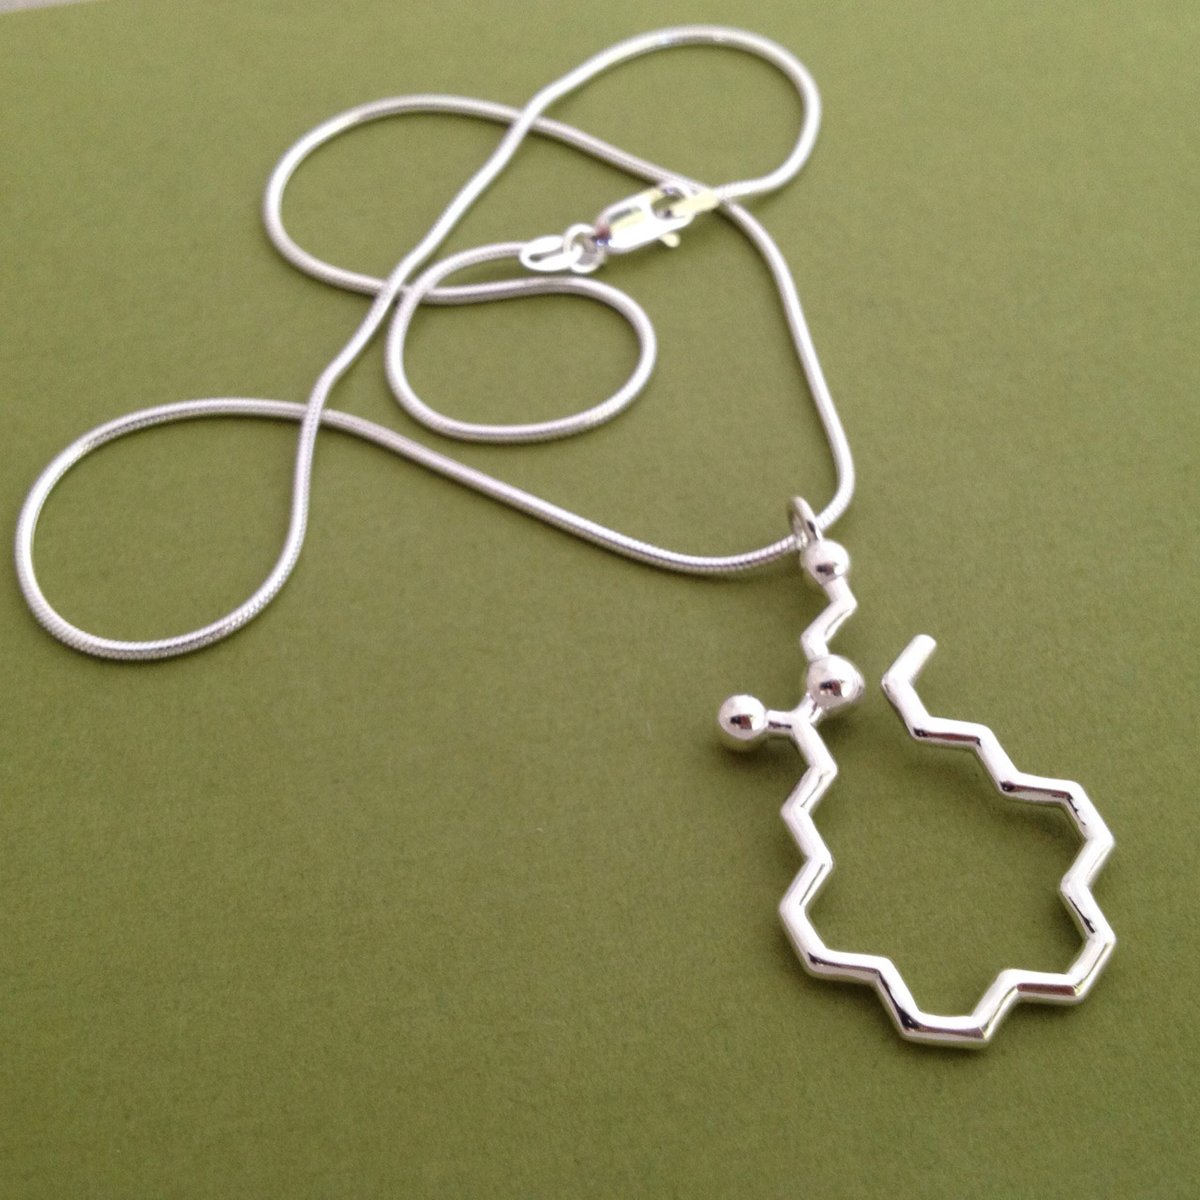 Image of anandamide necklace